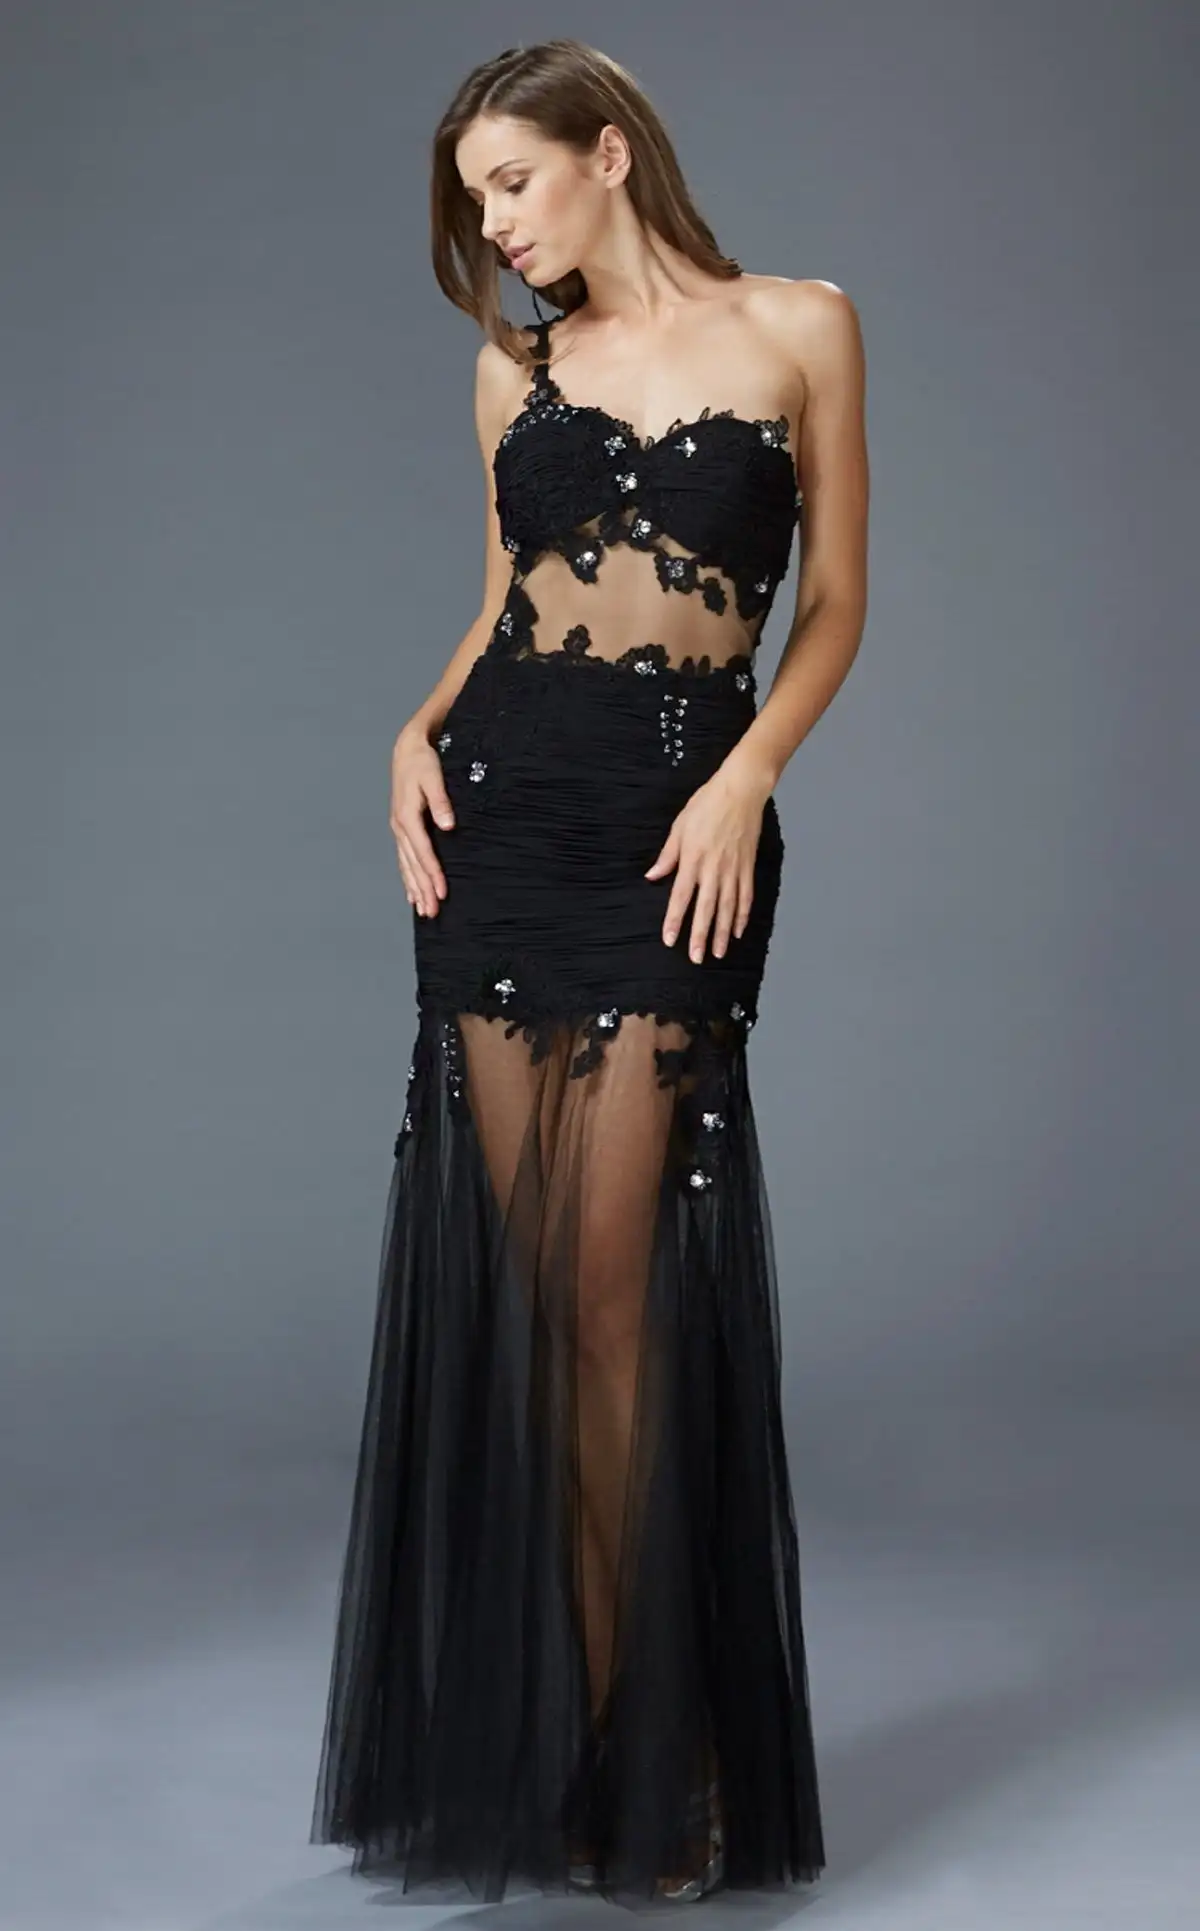 Black Sexy Sheer Bodice Prom Dresses One Shoulder Sweetheart Cocktail Party Gowns Beaded Applique Vestidos De Noche Juveniles